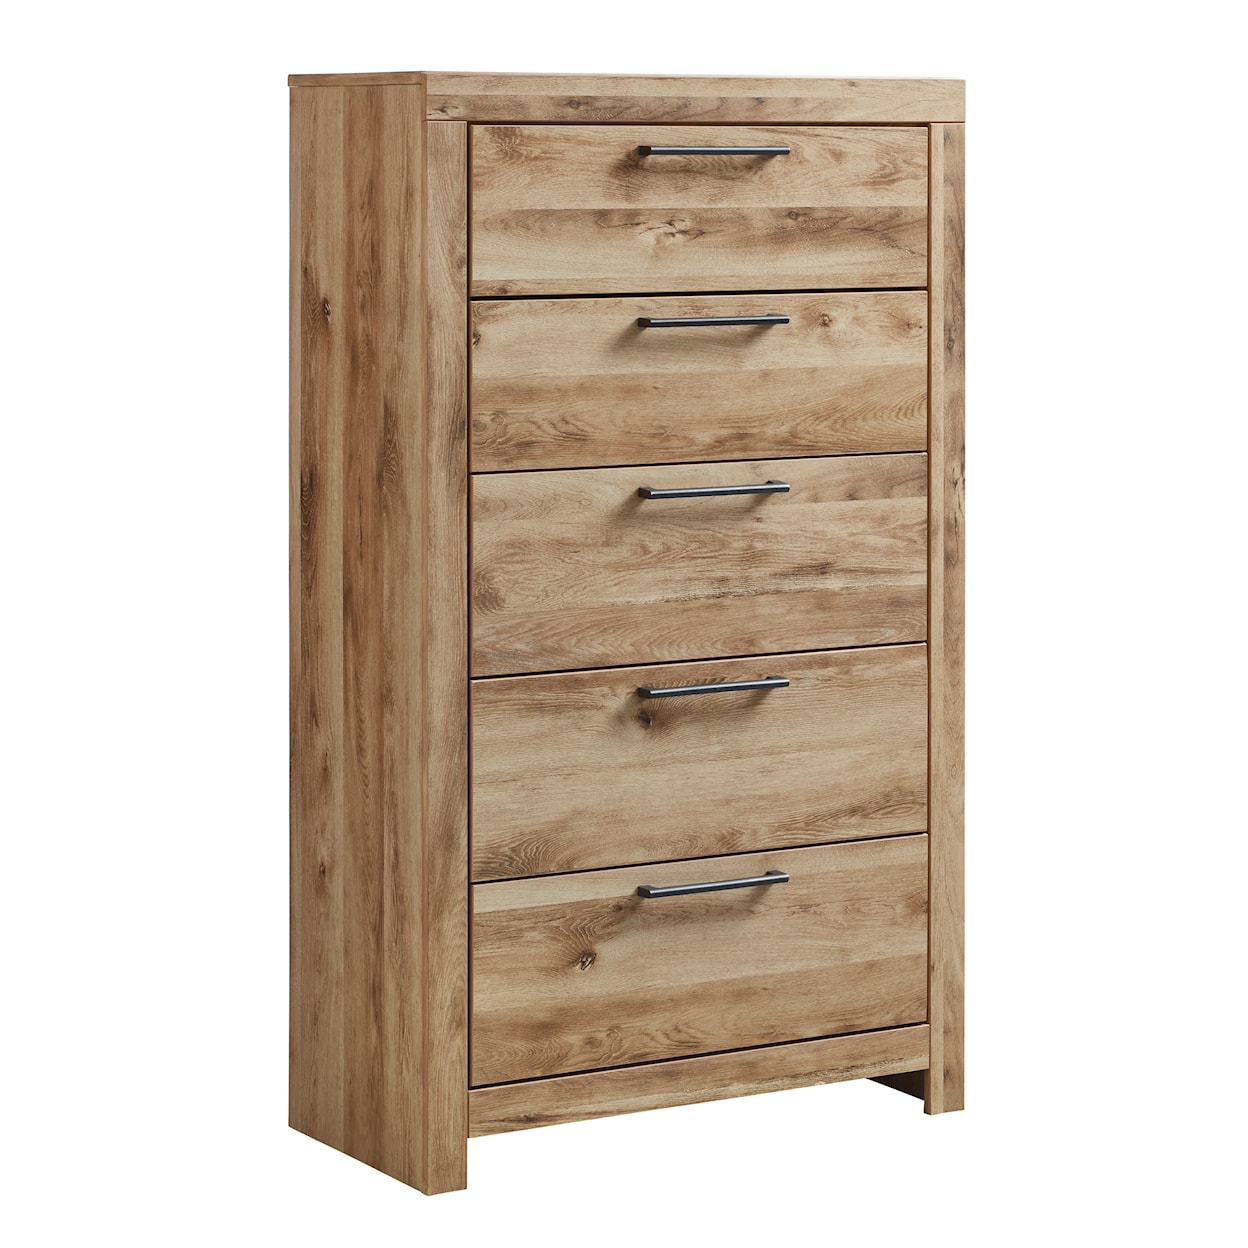 Signature Holden Chest of Drawers